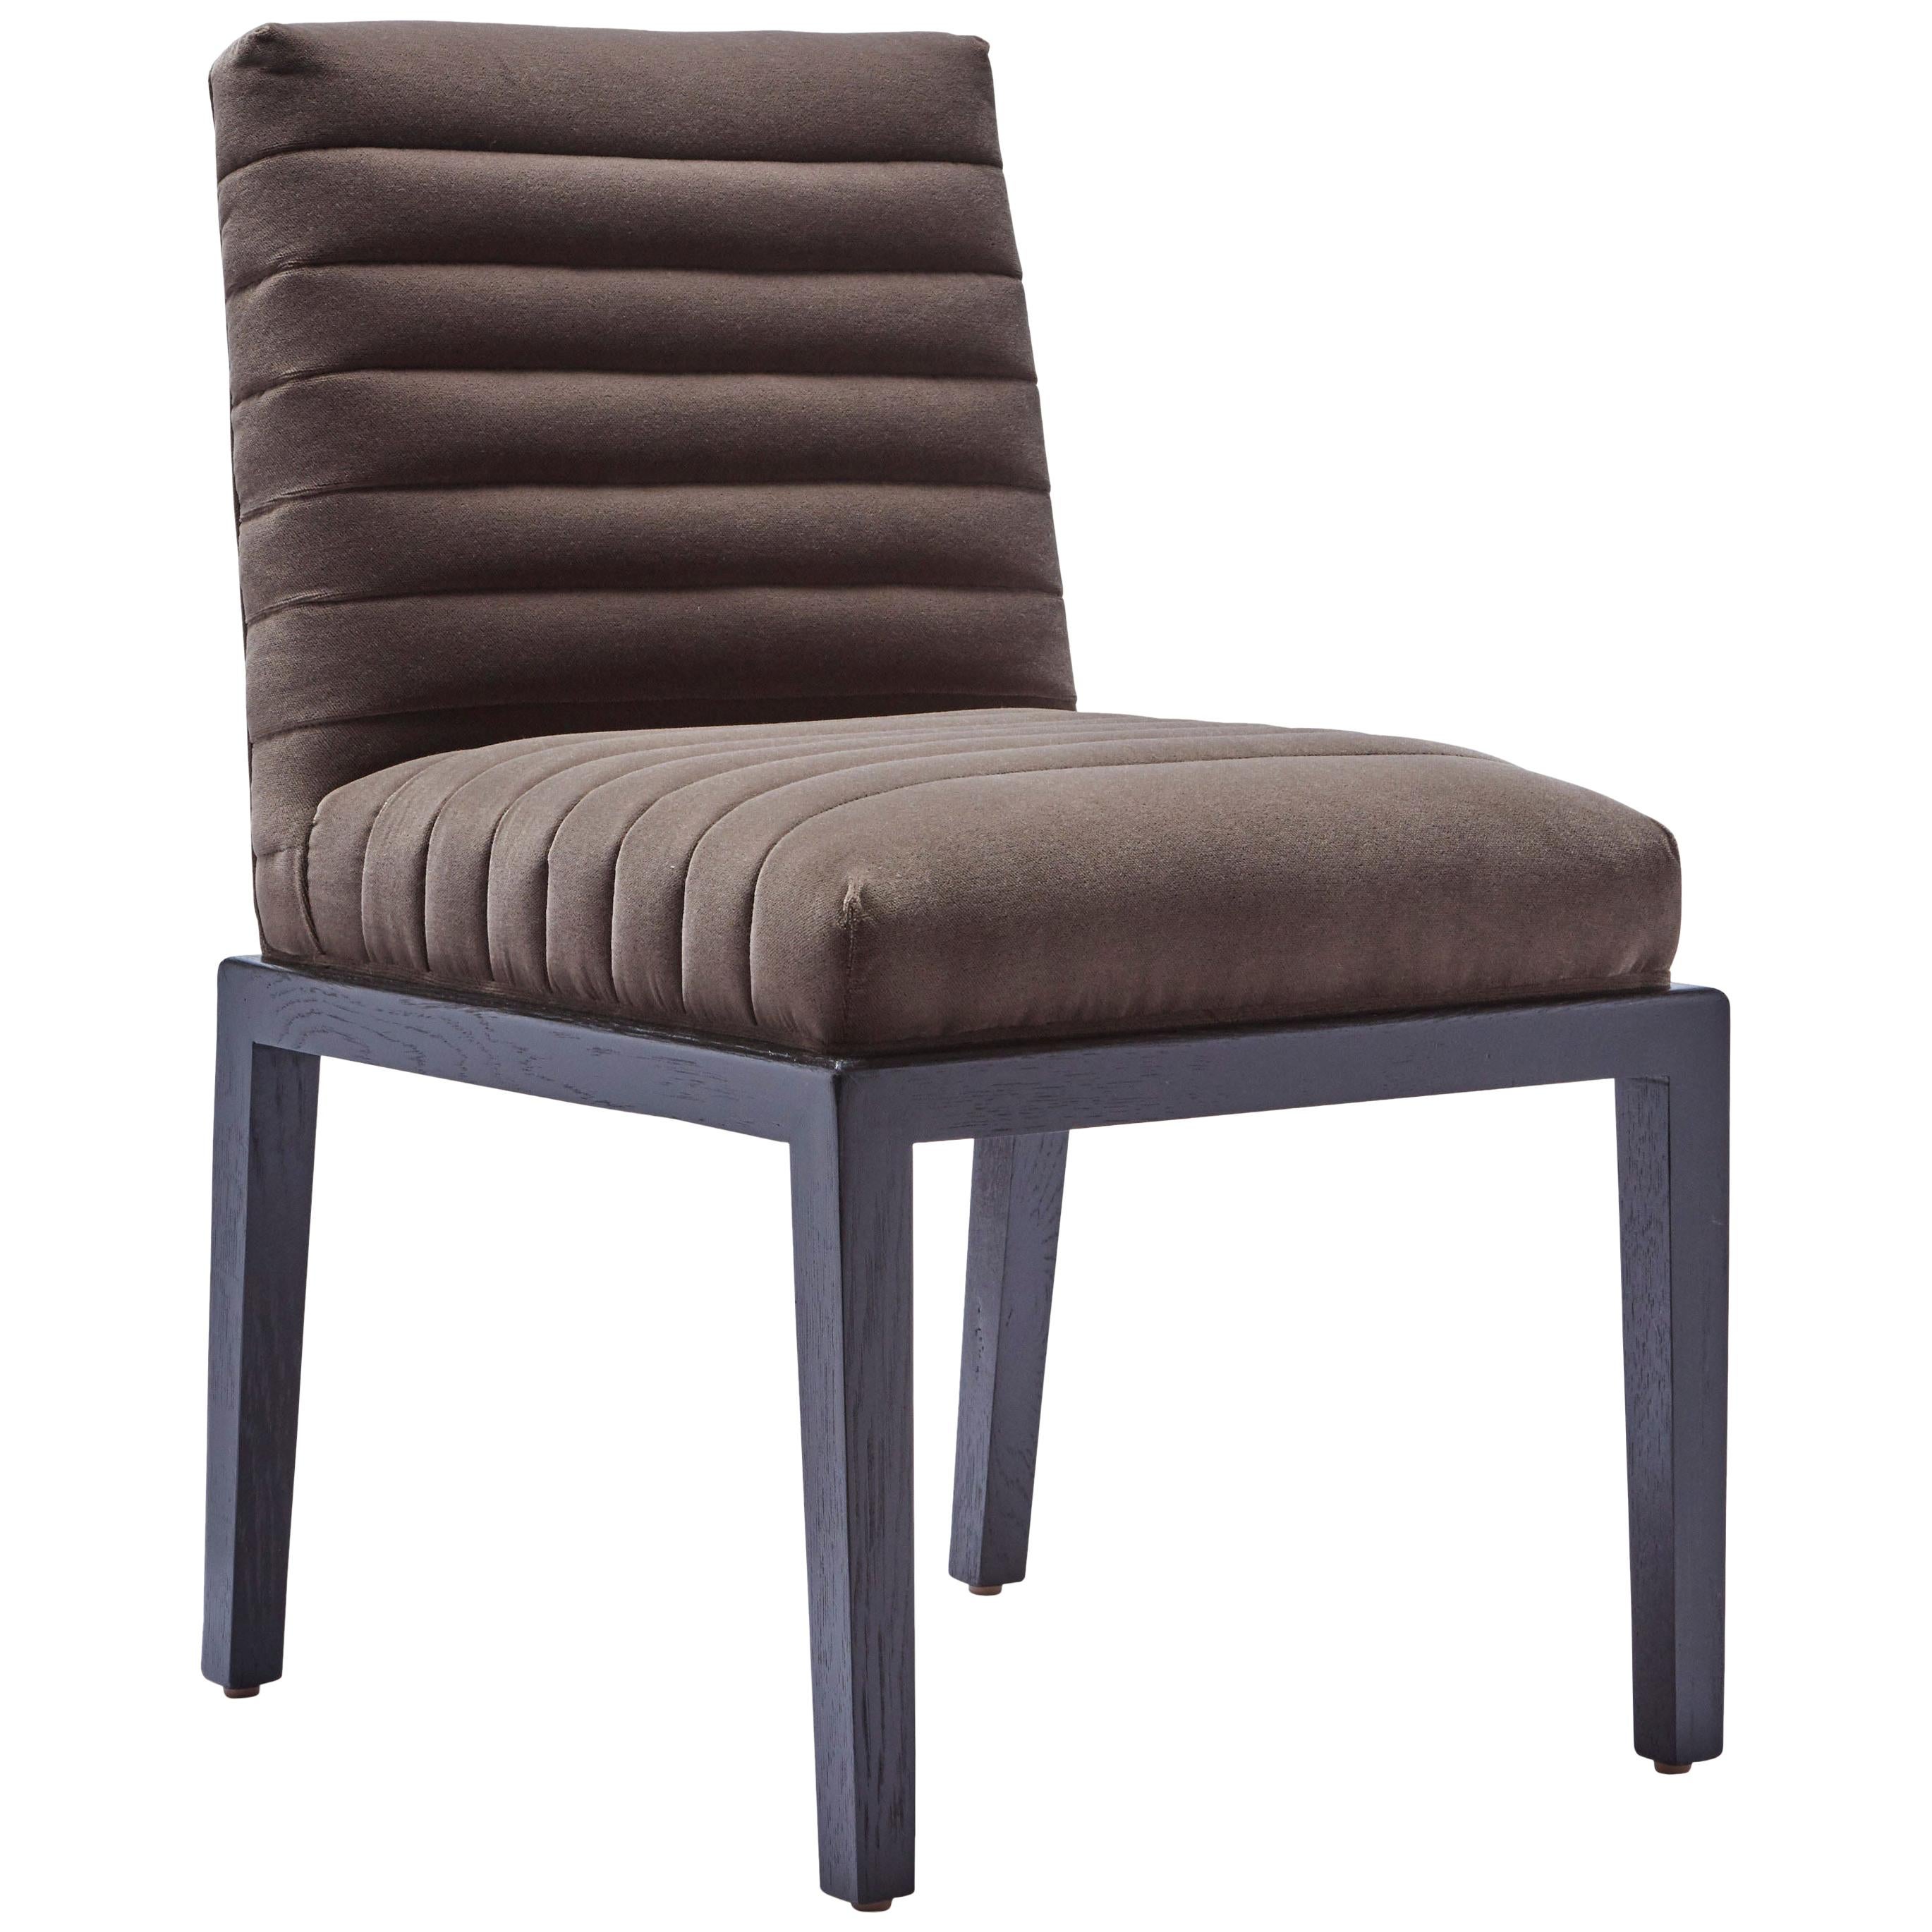 Shoreland Chair, Lowback by Brian Paquette for Lawson-Fenning